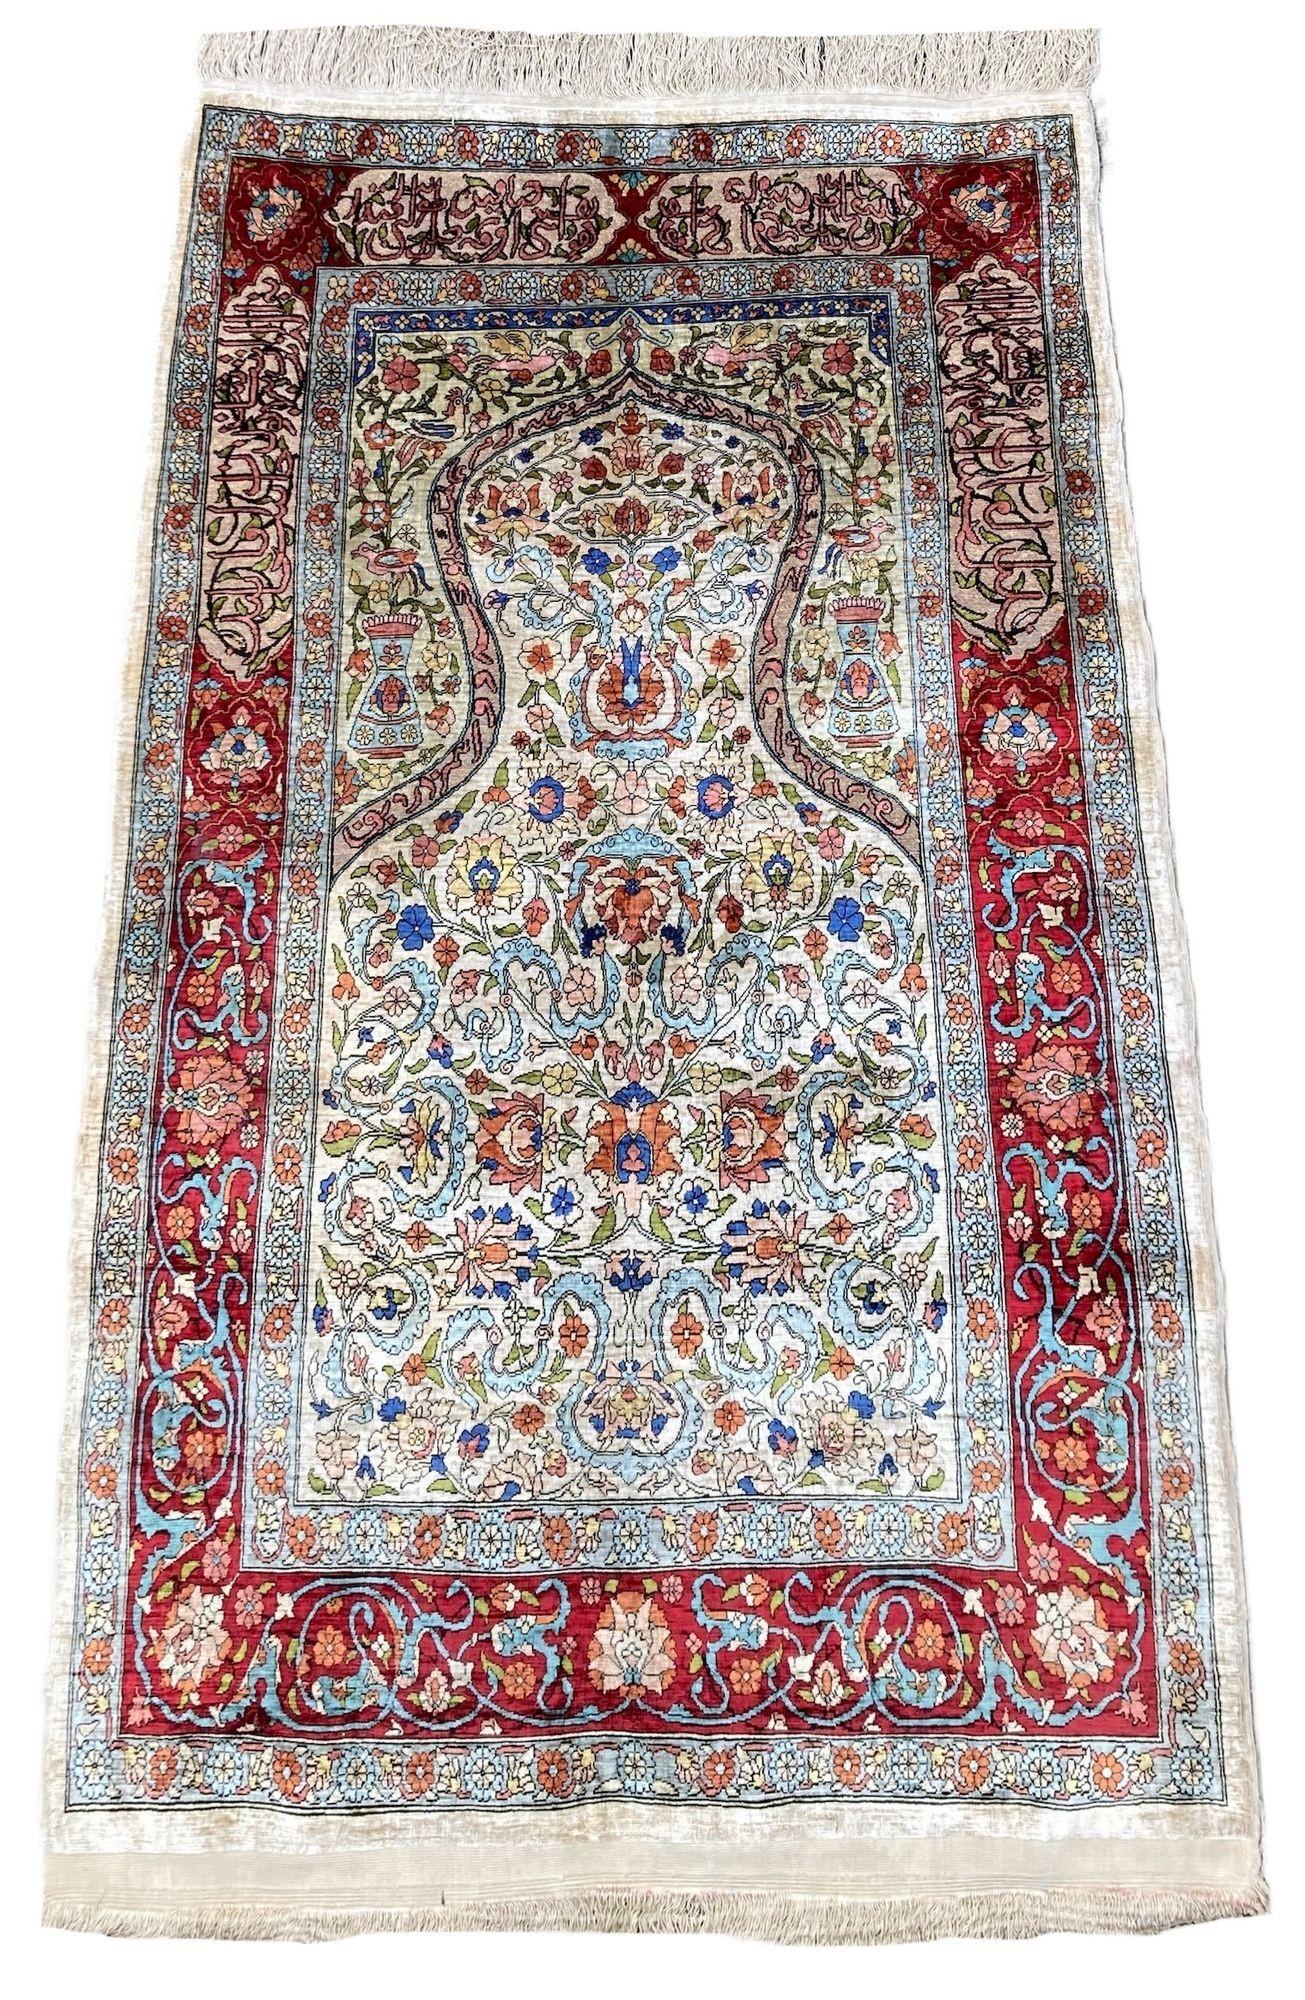 A beautiful silk Turkish rug, hand woven in Hereke (approximately 60 kms south-east from Istanbul) circa 1980s with a traditional ‘Mihrab’ design on an ivory field. Very finely woven with 11x11 knots per cm on a silk foundation highlighted with